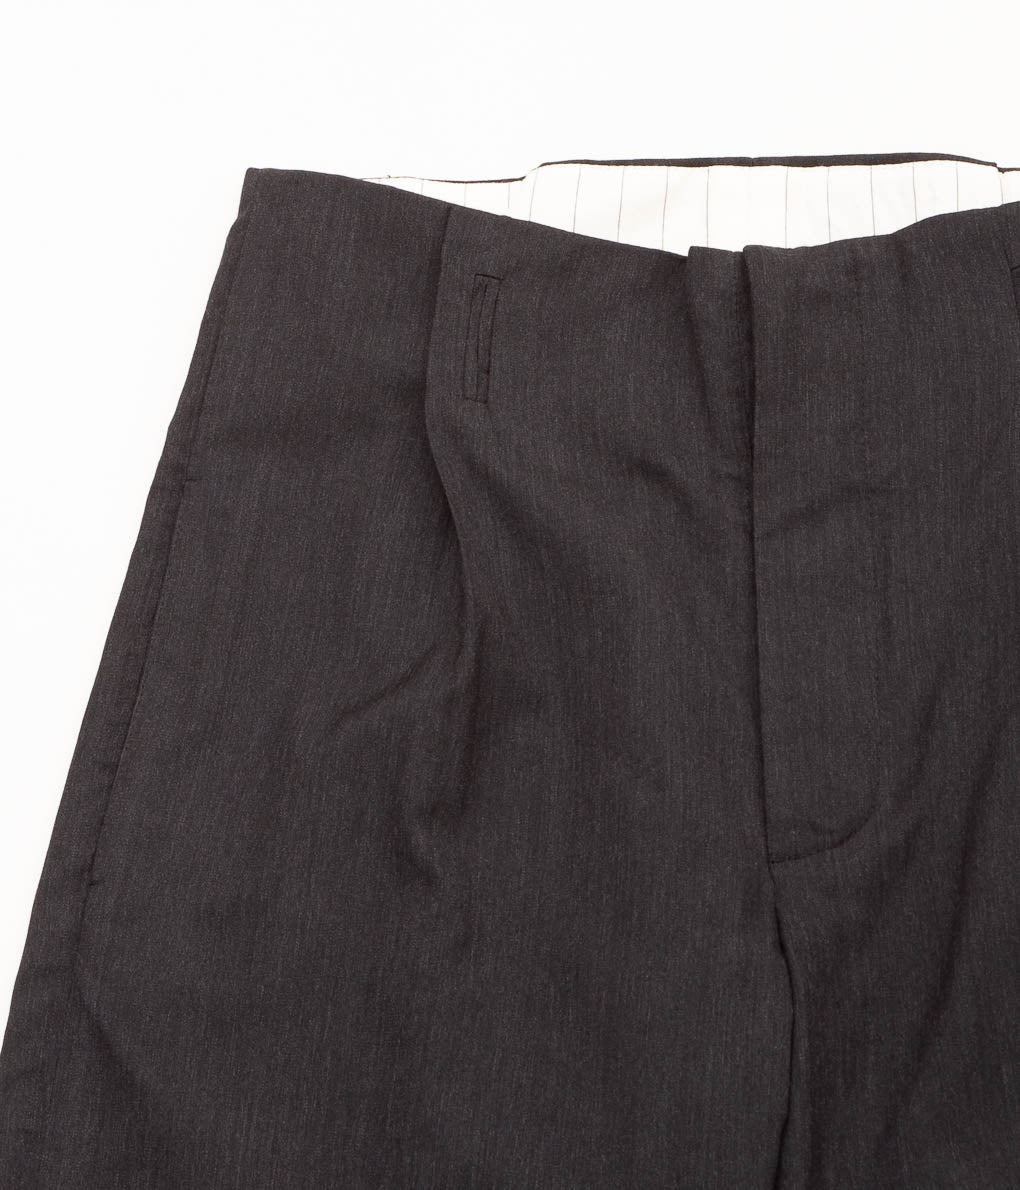 K`ANG "UNISEX PLEATED-WAIST WIDE FIT TROUSERS"(DARK GREY)